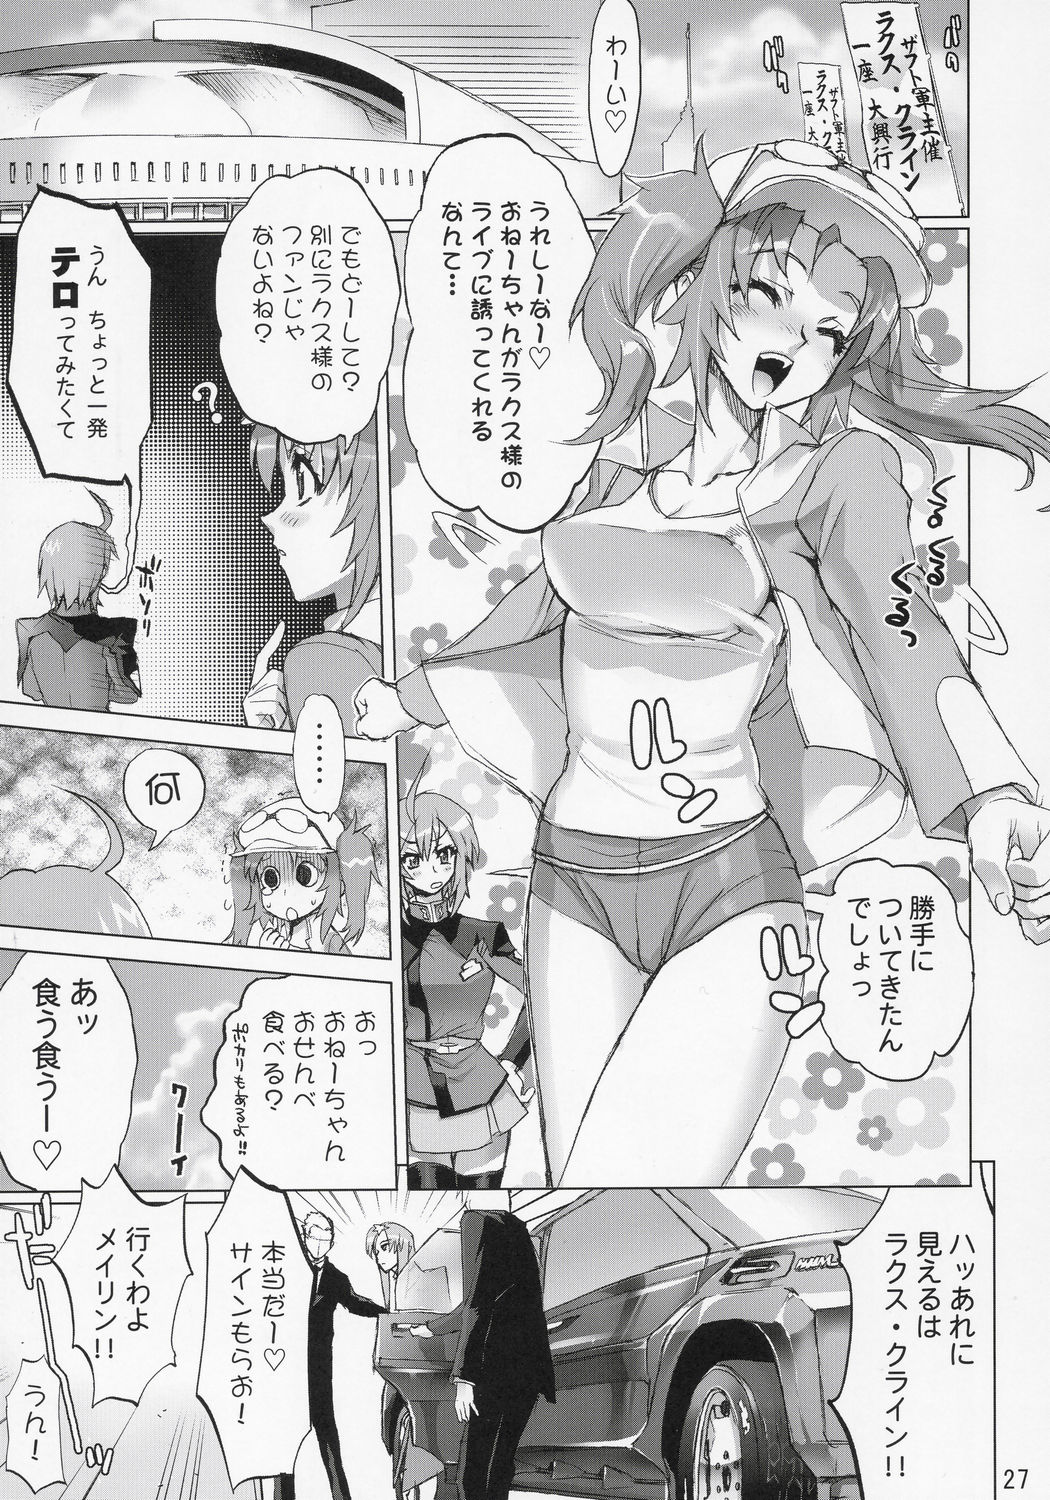 (C69) [Digital Accel Works] Inazuma Warrior 2 (Various) page 26 full